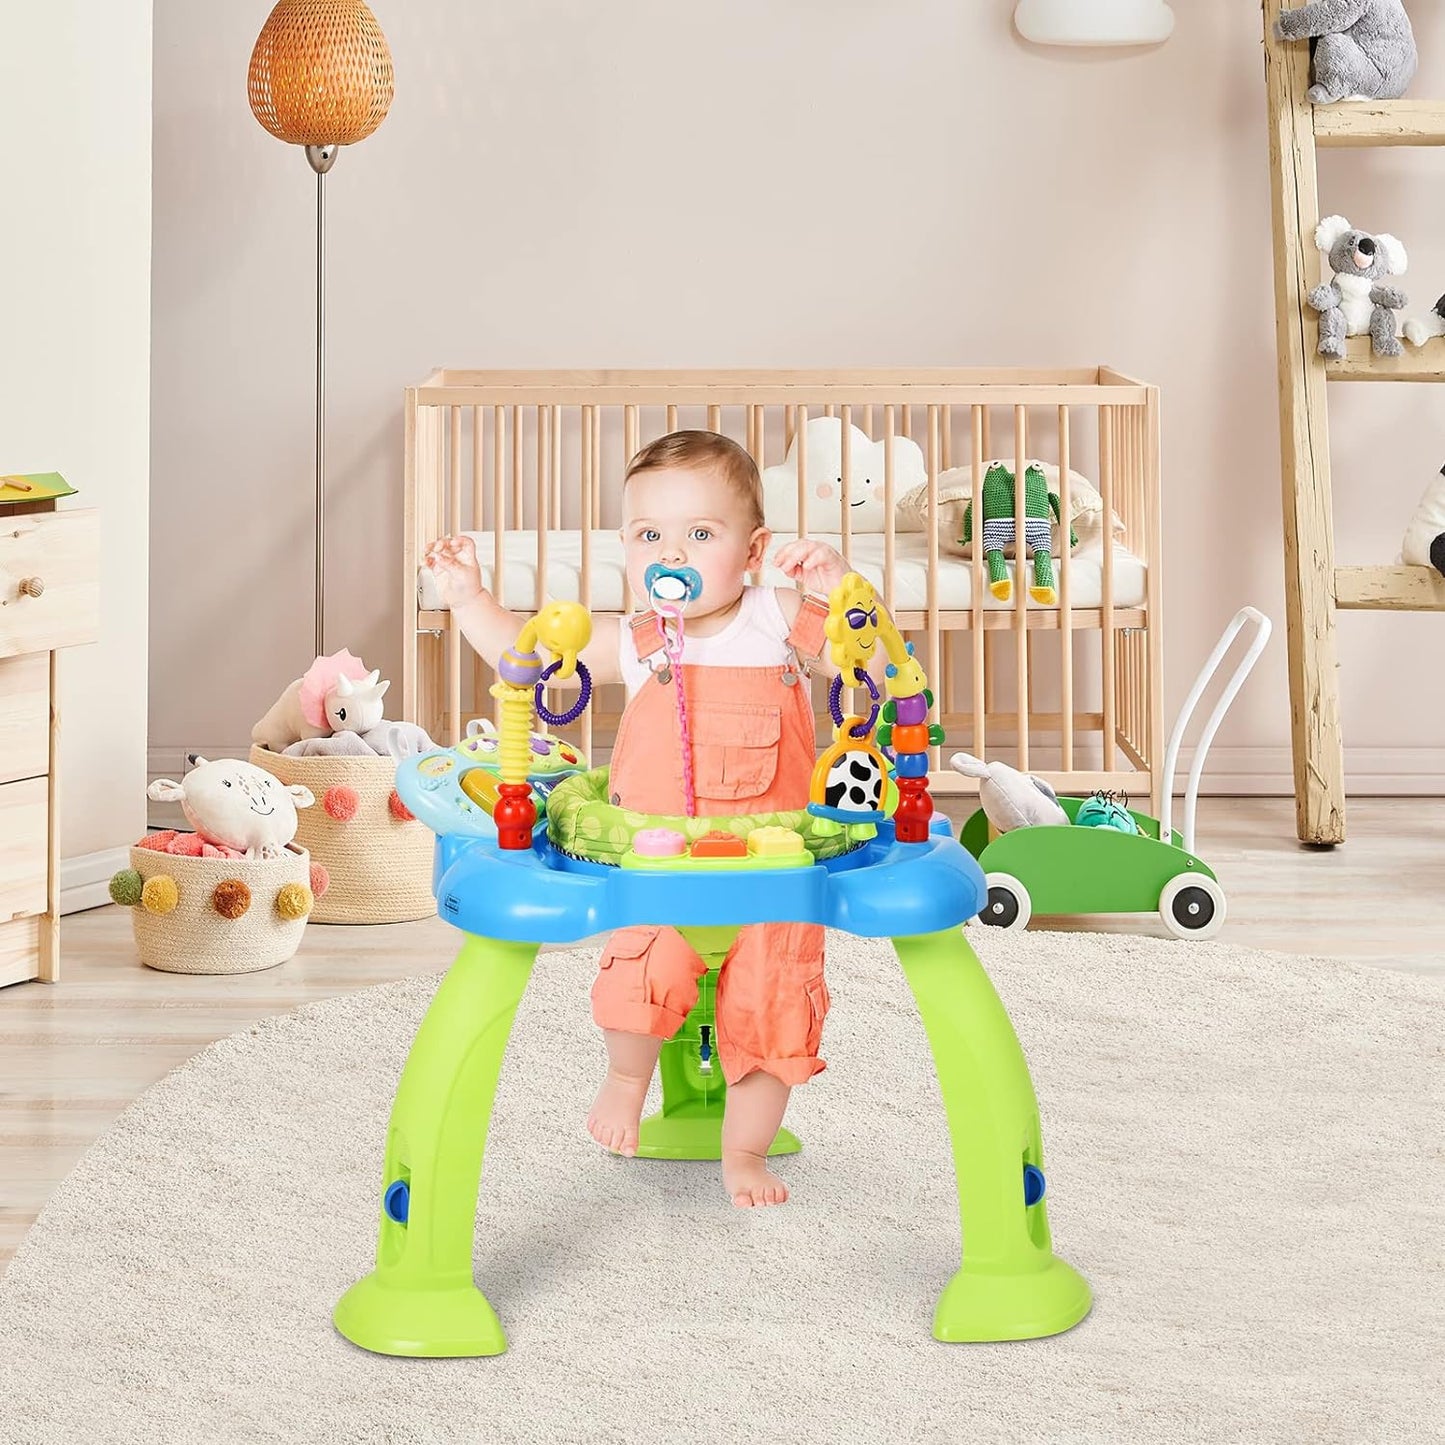 BABY JOY 2-in 1 Infant Activity Center, Baby Jumper w/360-Degree Rotating Seat, 3 Adjustable Height, Lights, Music, Piano, Toys, Sit-to-Stand Interactive Station for 6-36 Months